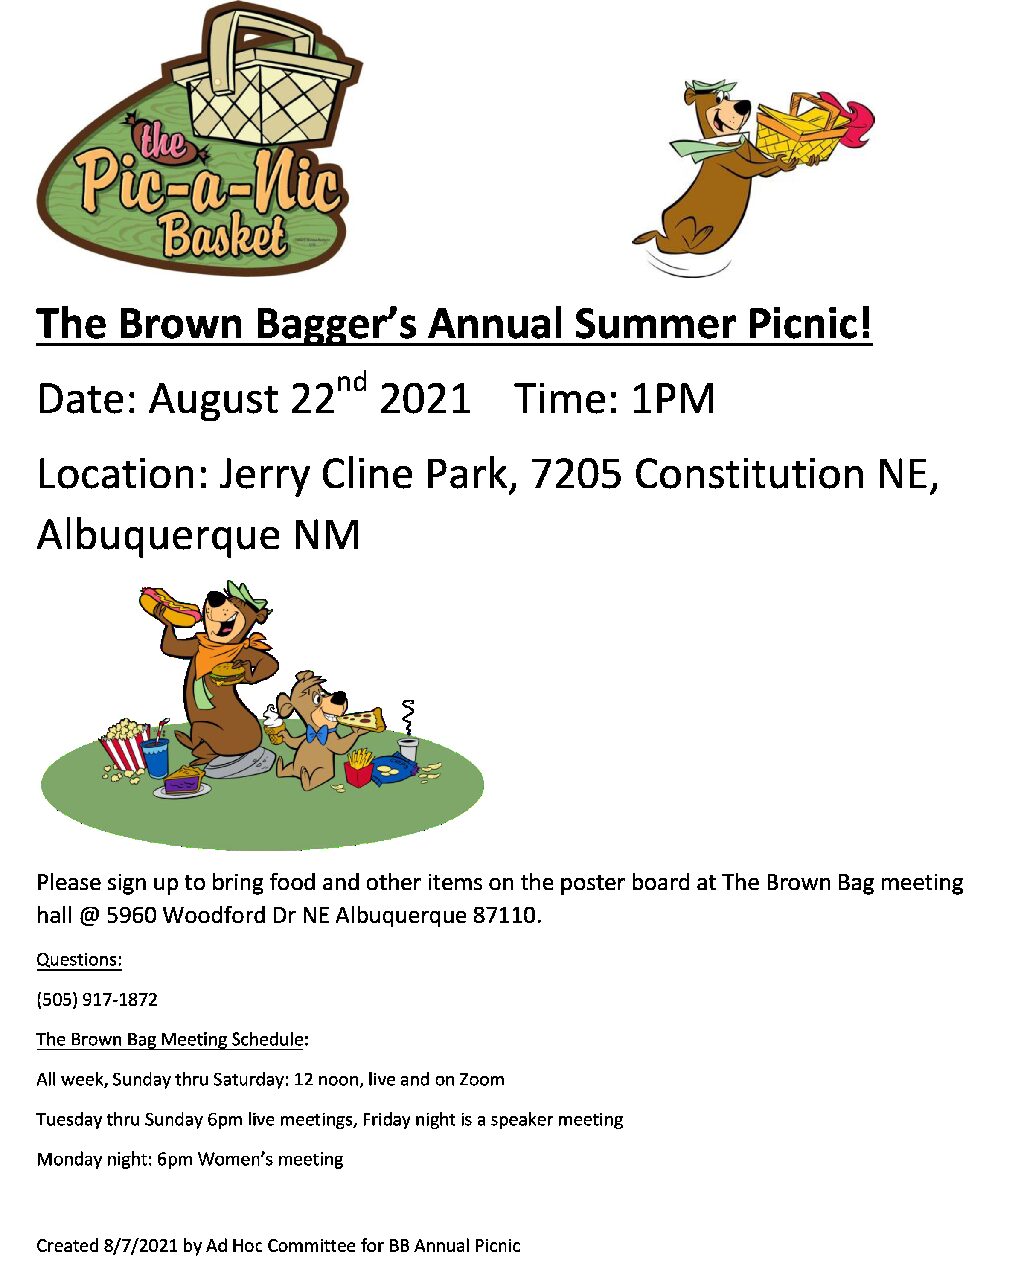 Brown Bagger’s Annual Summer Picnic